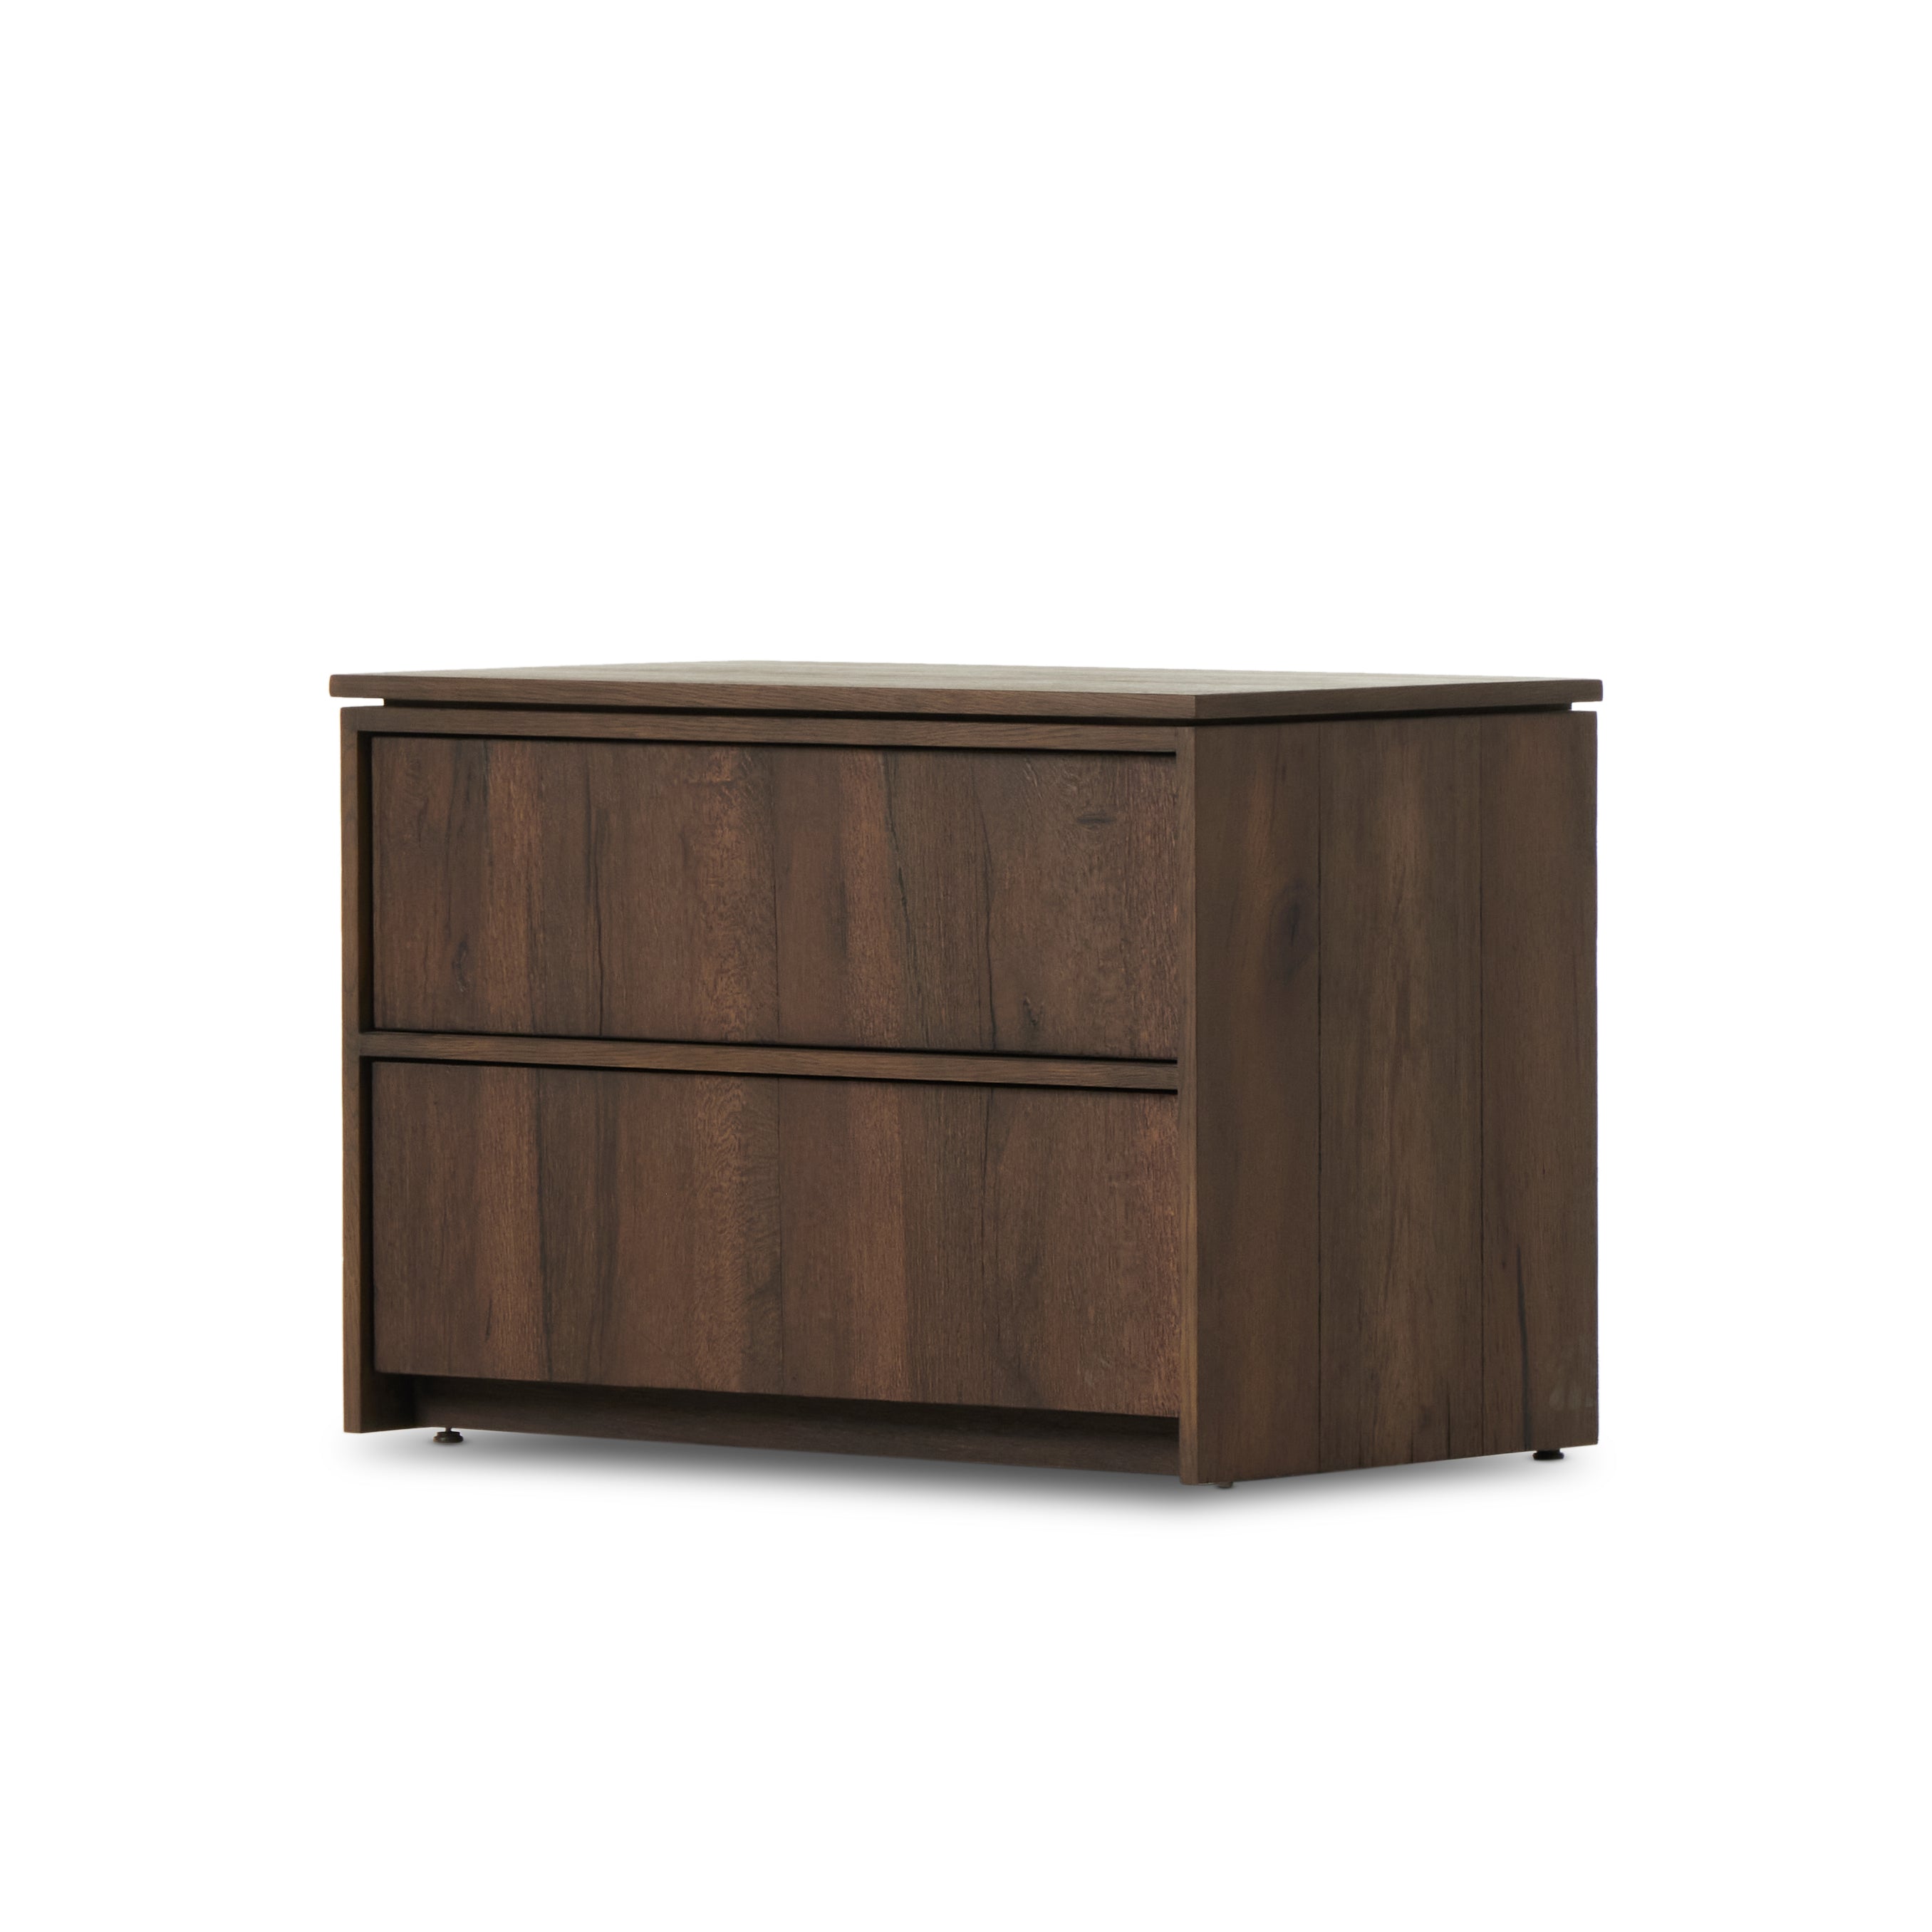 Structured lines define the sleek, modern shape of this large nightstand. Dark oak finishing showcases heavy graining and detail. Amethyst Home provides interior design, new construction, custom furniture, and area rugs in the Tampa metro area.